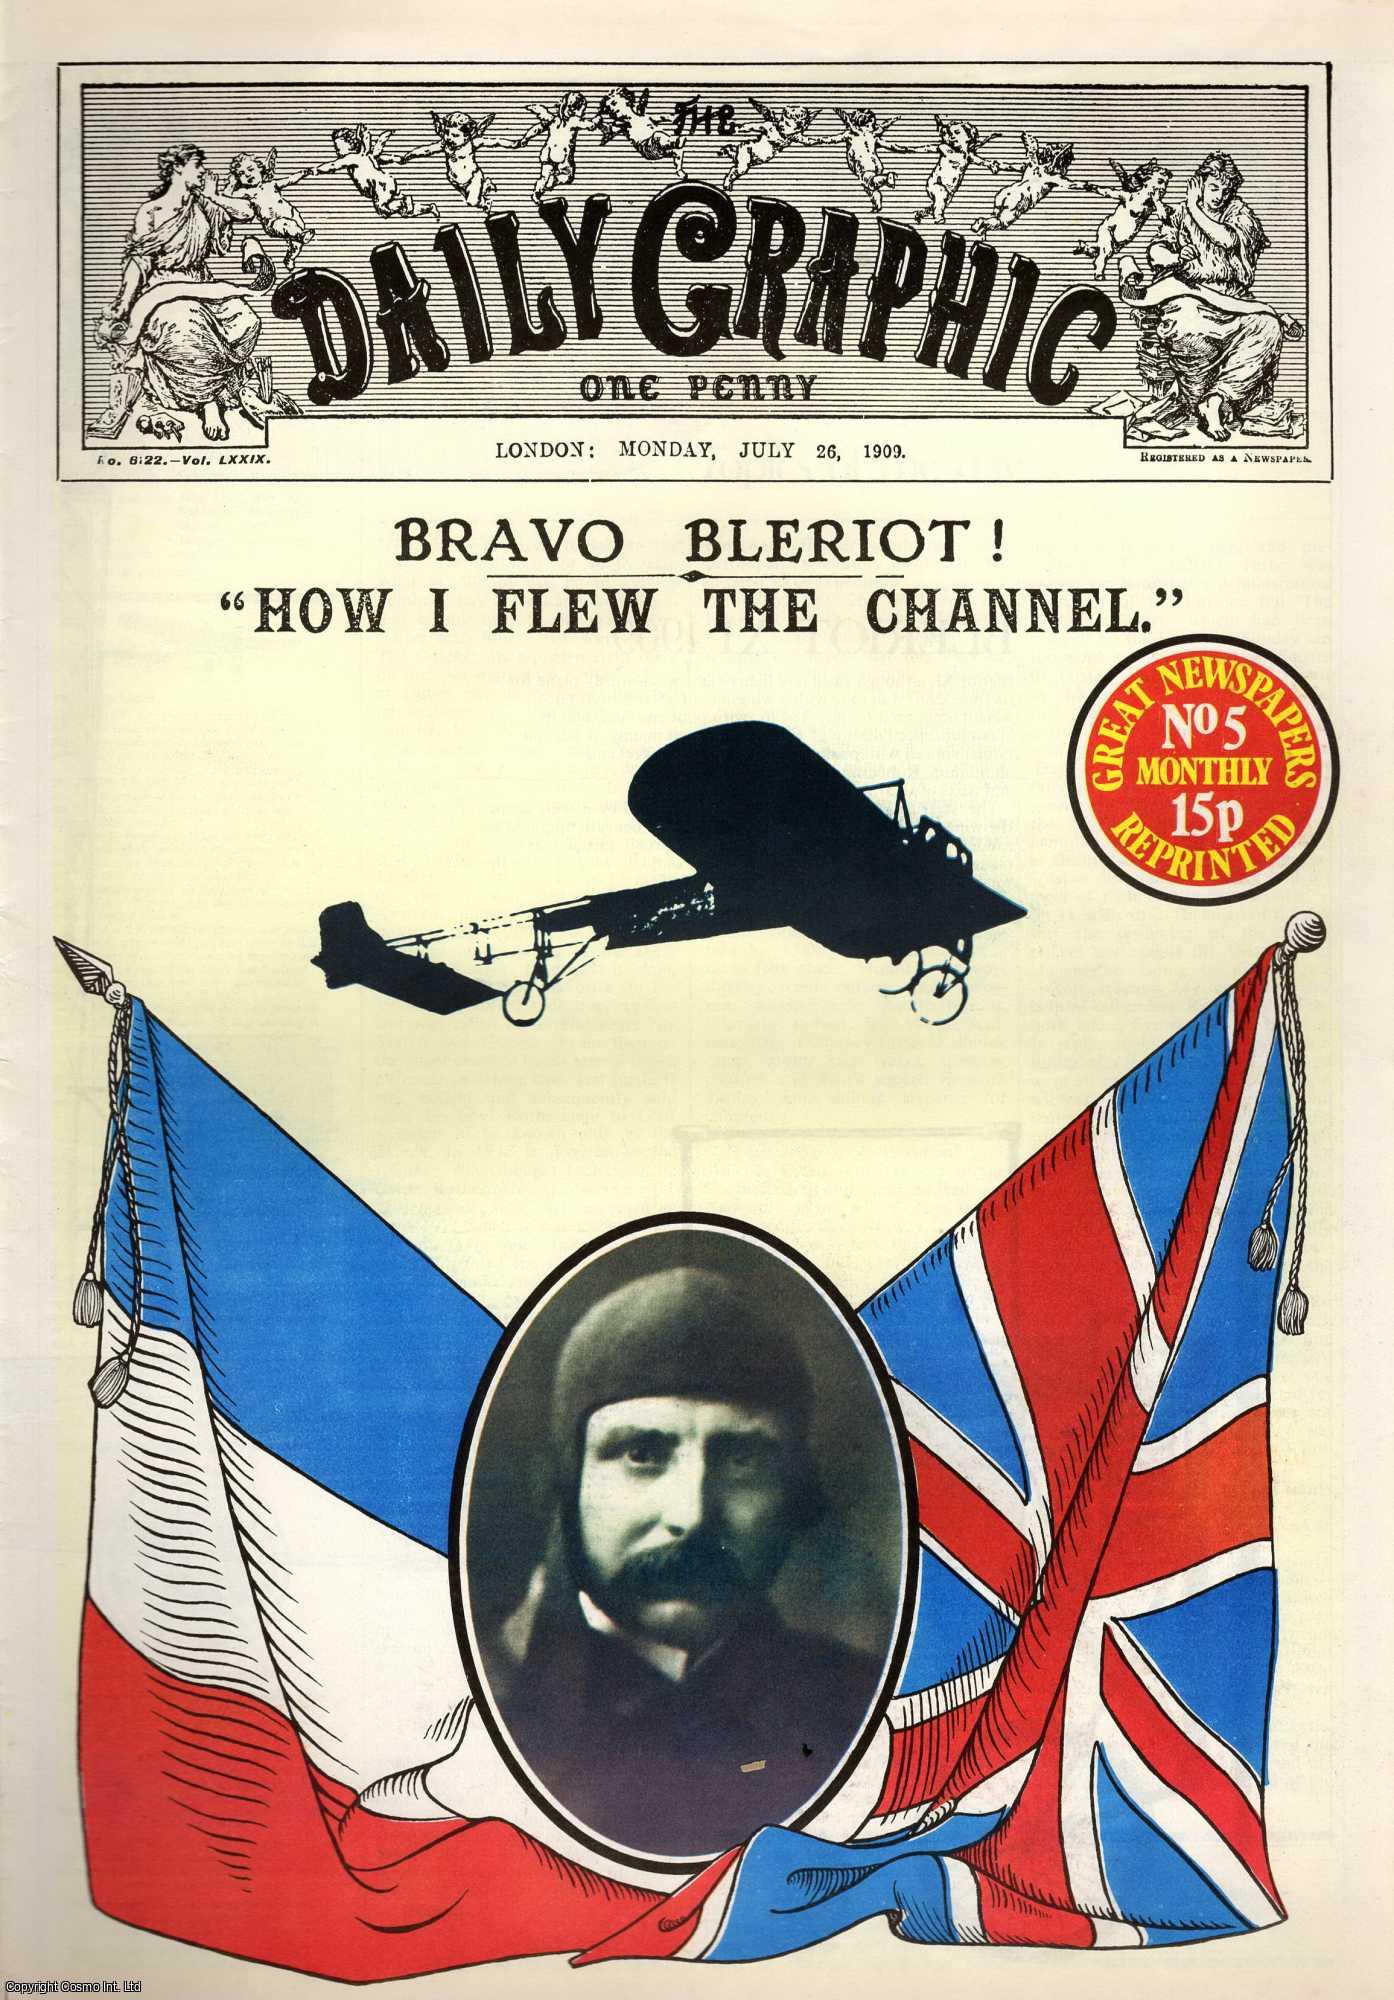 --- - Bravo Bleriot. How I Flew The Channel. The Daily Graphic. Monday, July 26th, 1909. Great Newspapers Reprinted, Number 5.